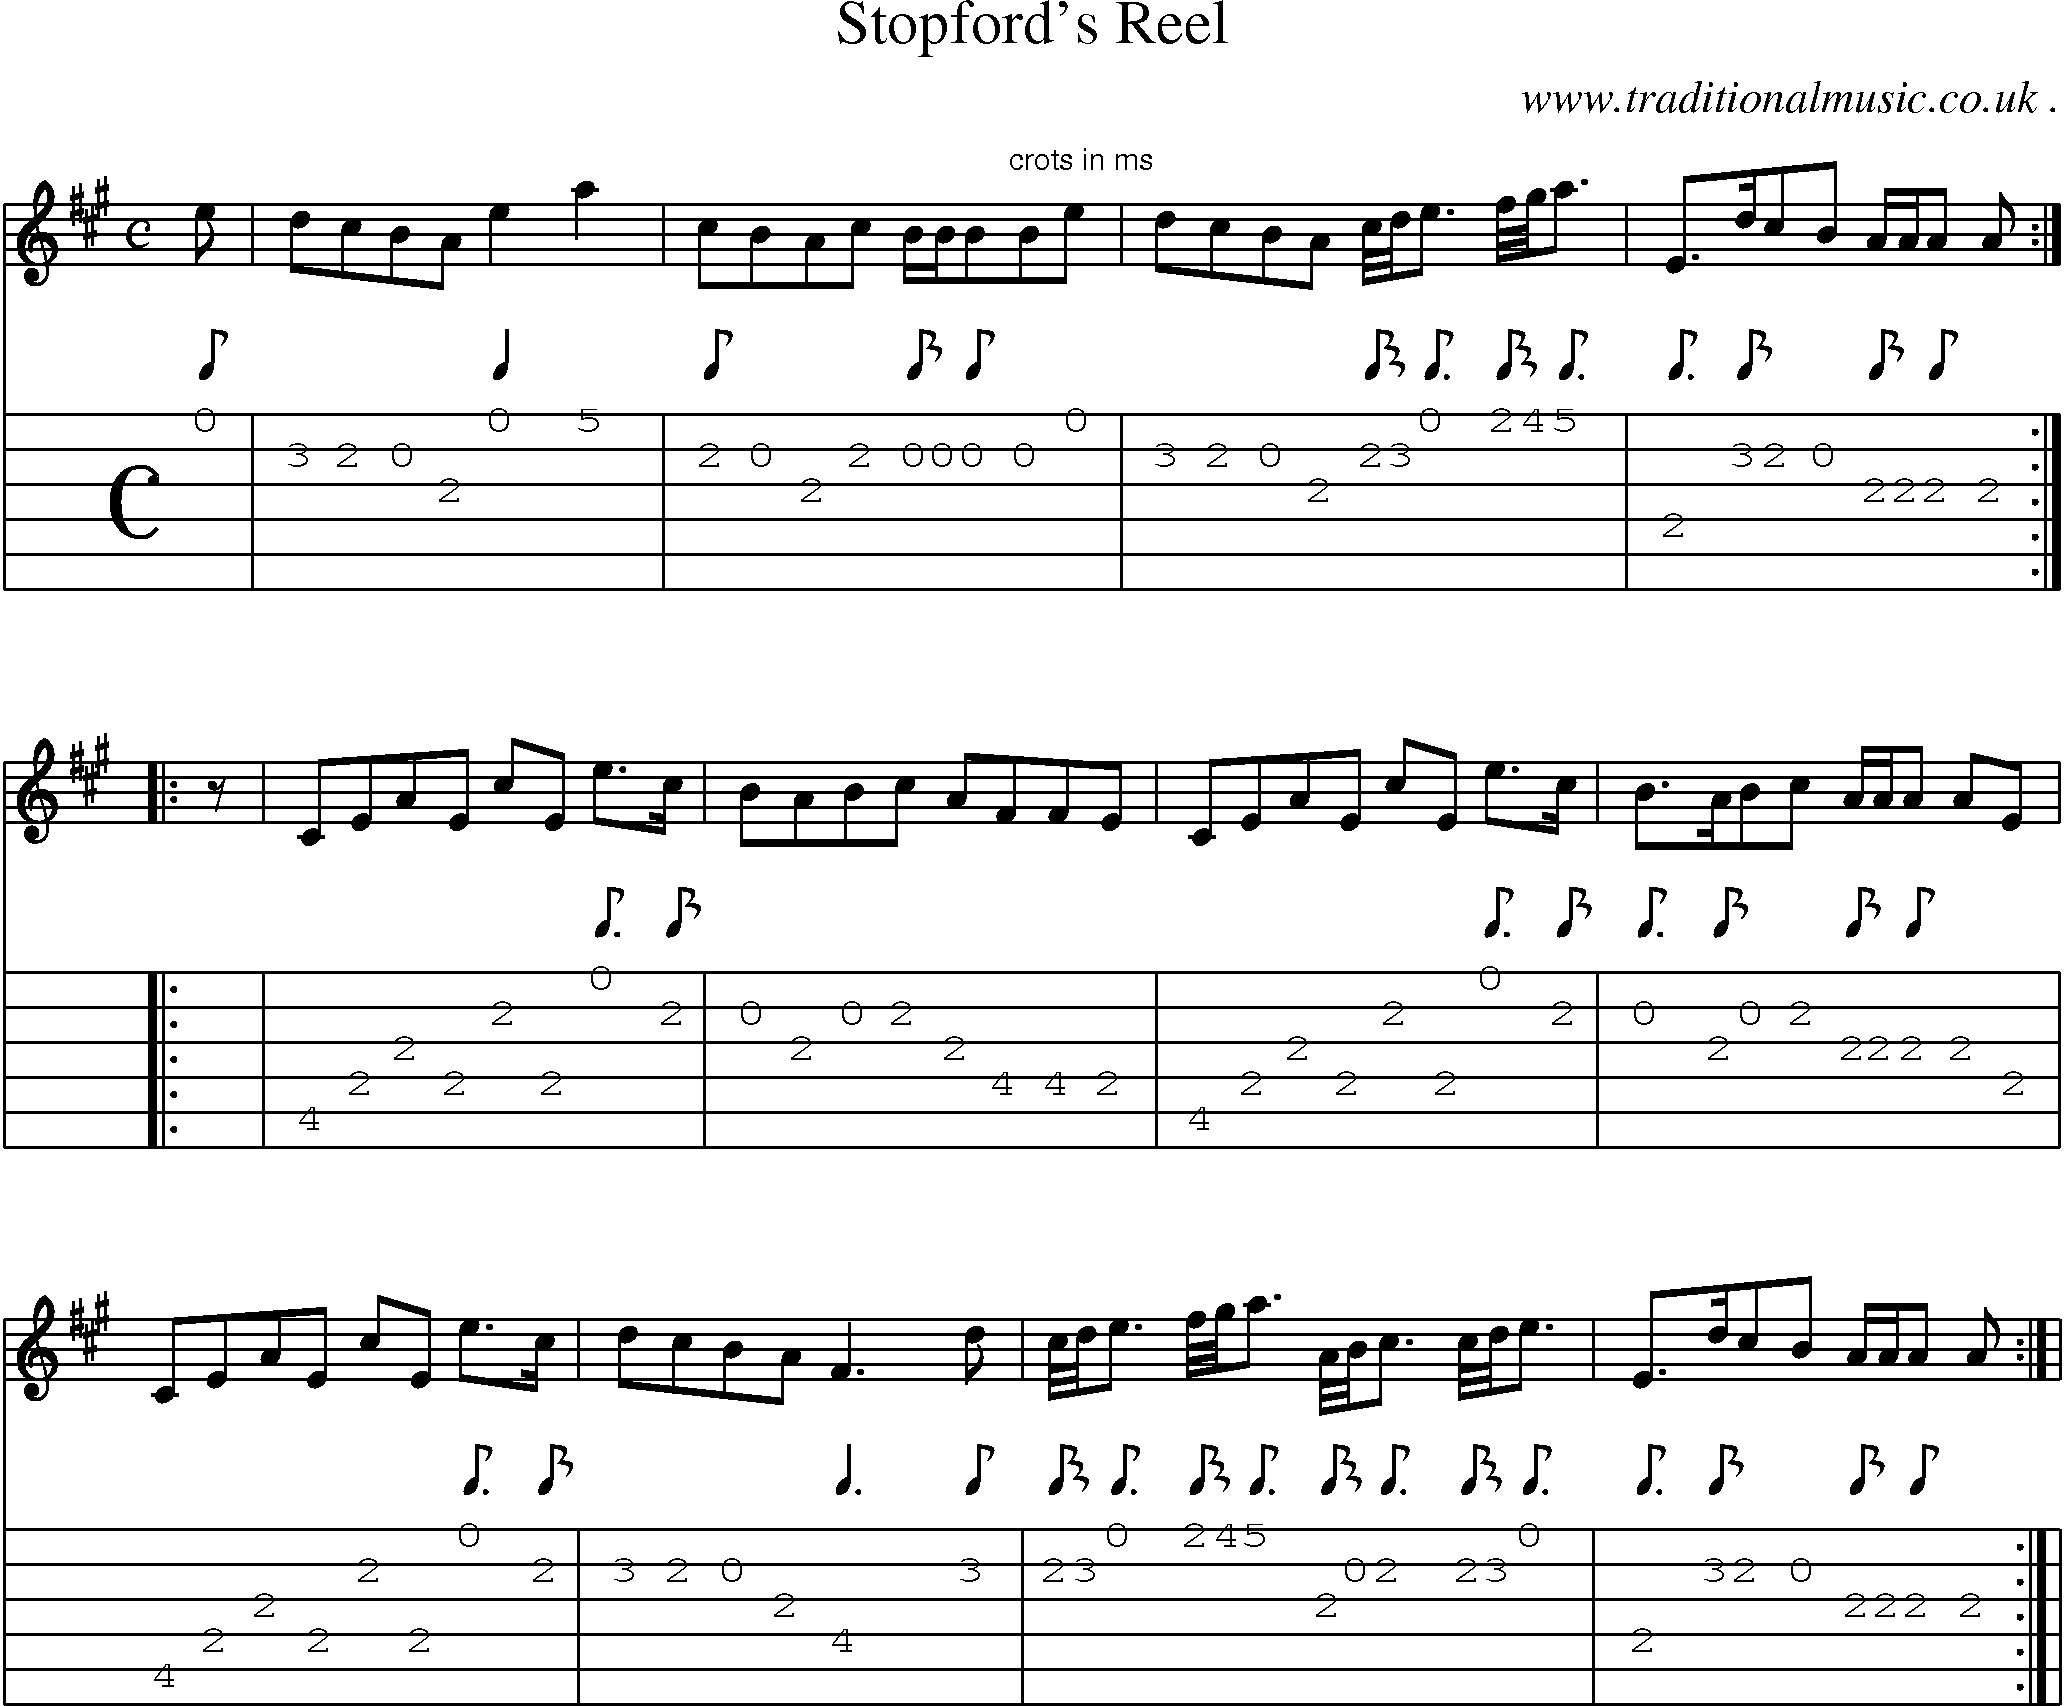 Sheet-Music and Guitar Tabs for Stopfords Reel